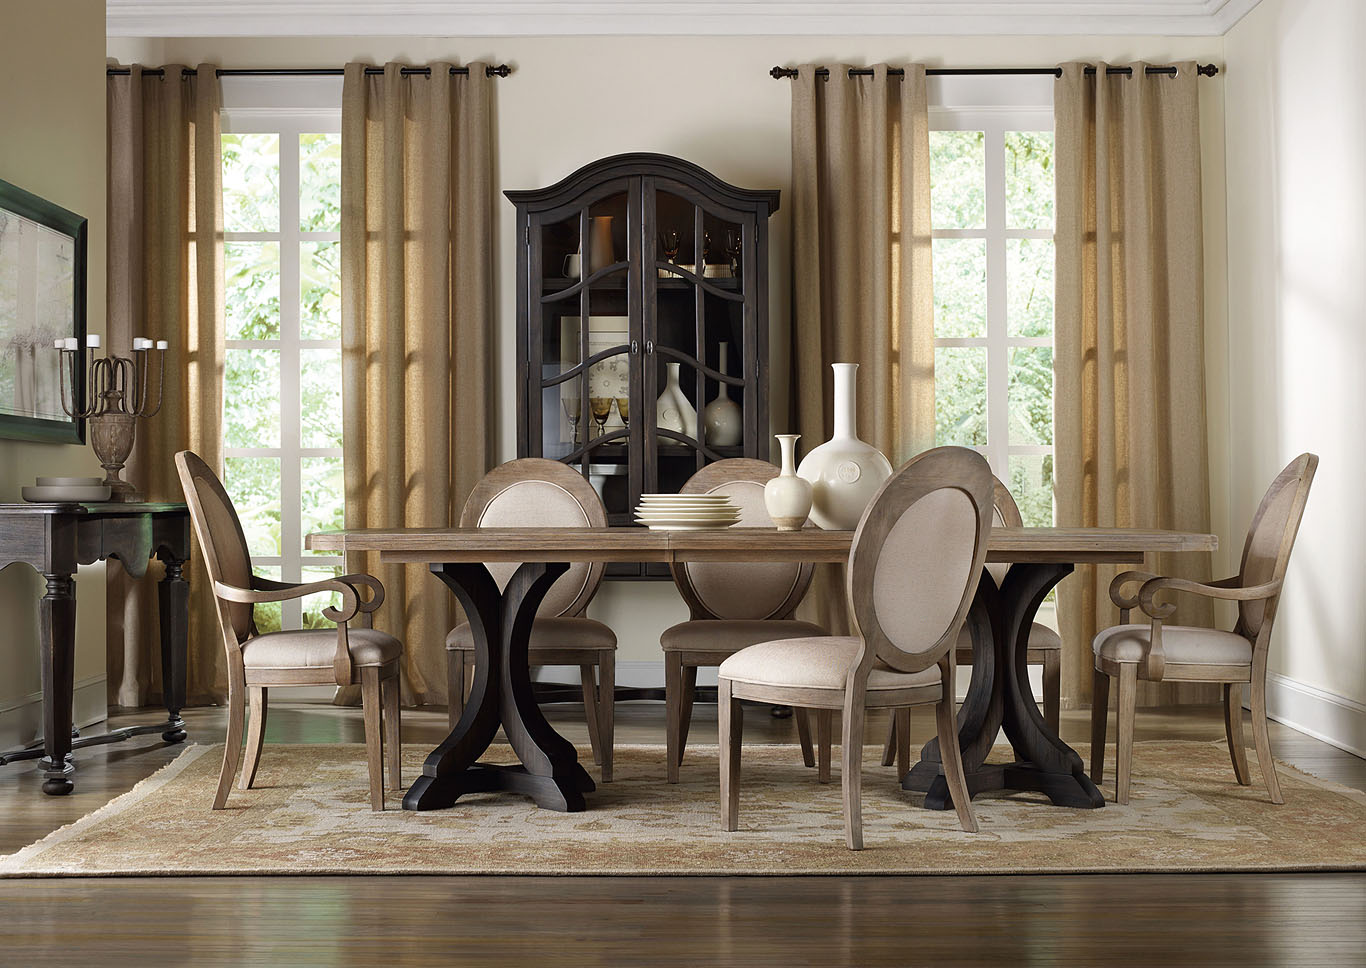 Corsica Rectangle Pedestal Dining Table, Dark Wood Dining Table With Light Chairs